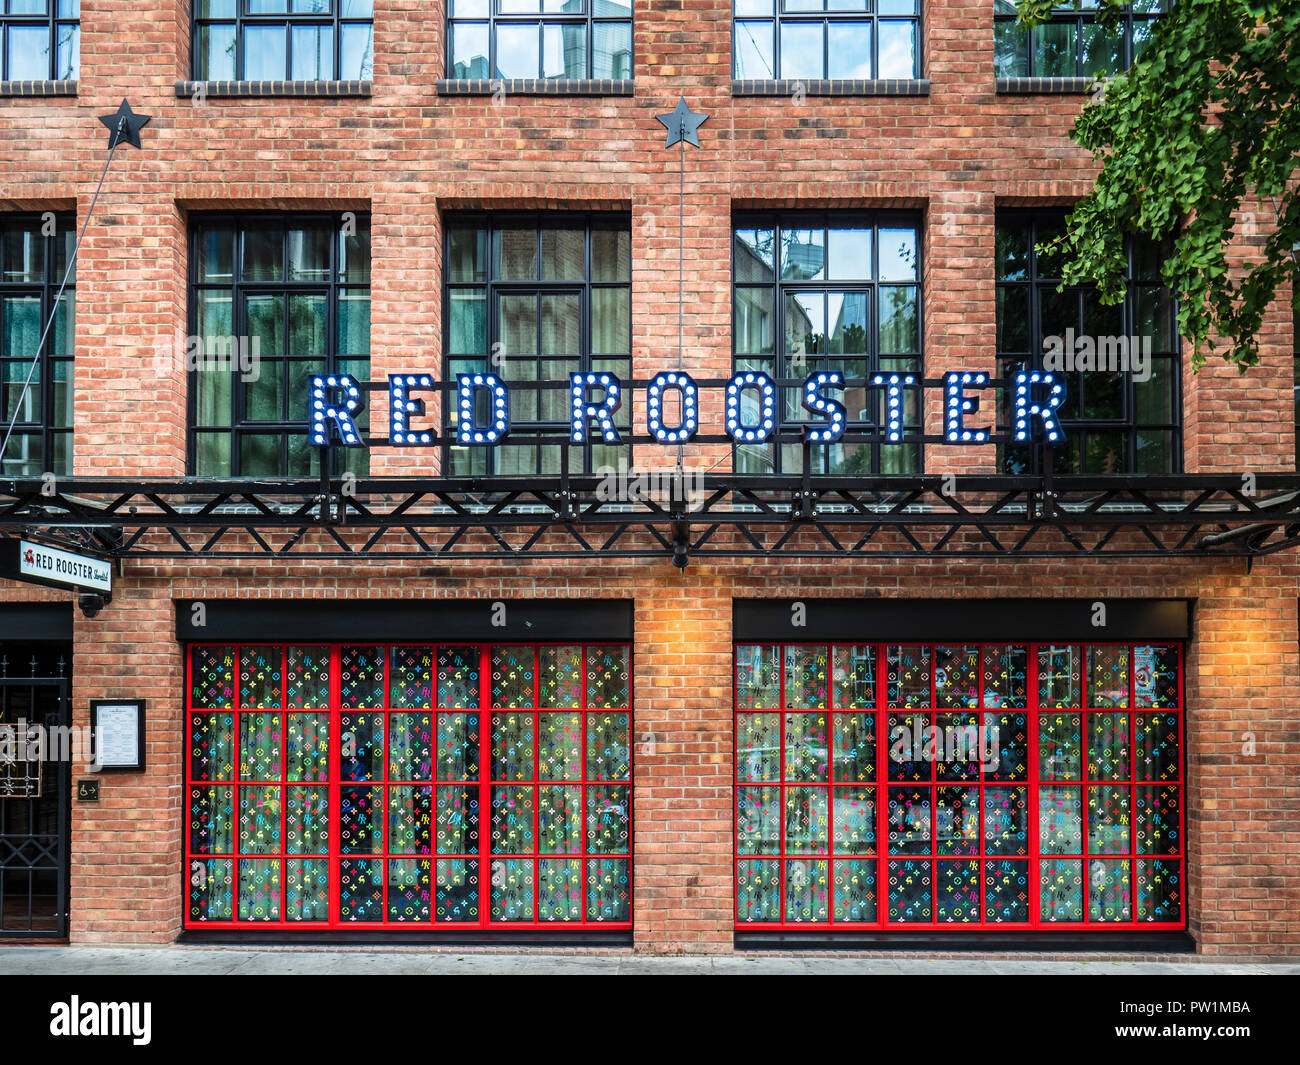 Red Rooster Shoreditch London - New York restauranteur Marcus Samuelsson opened a London branch of his Harlem Soul Food restaurant Stock Photo